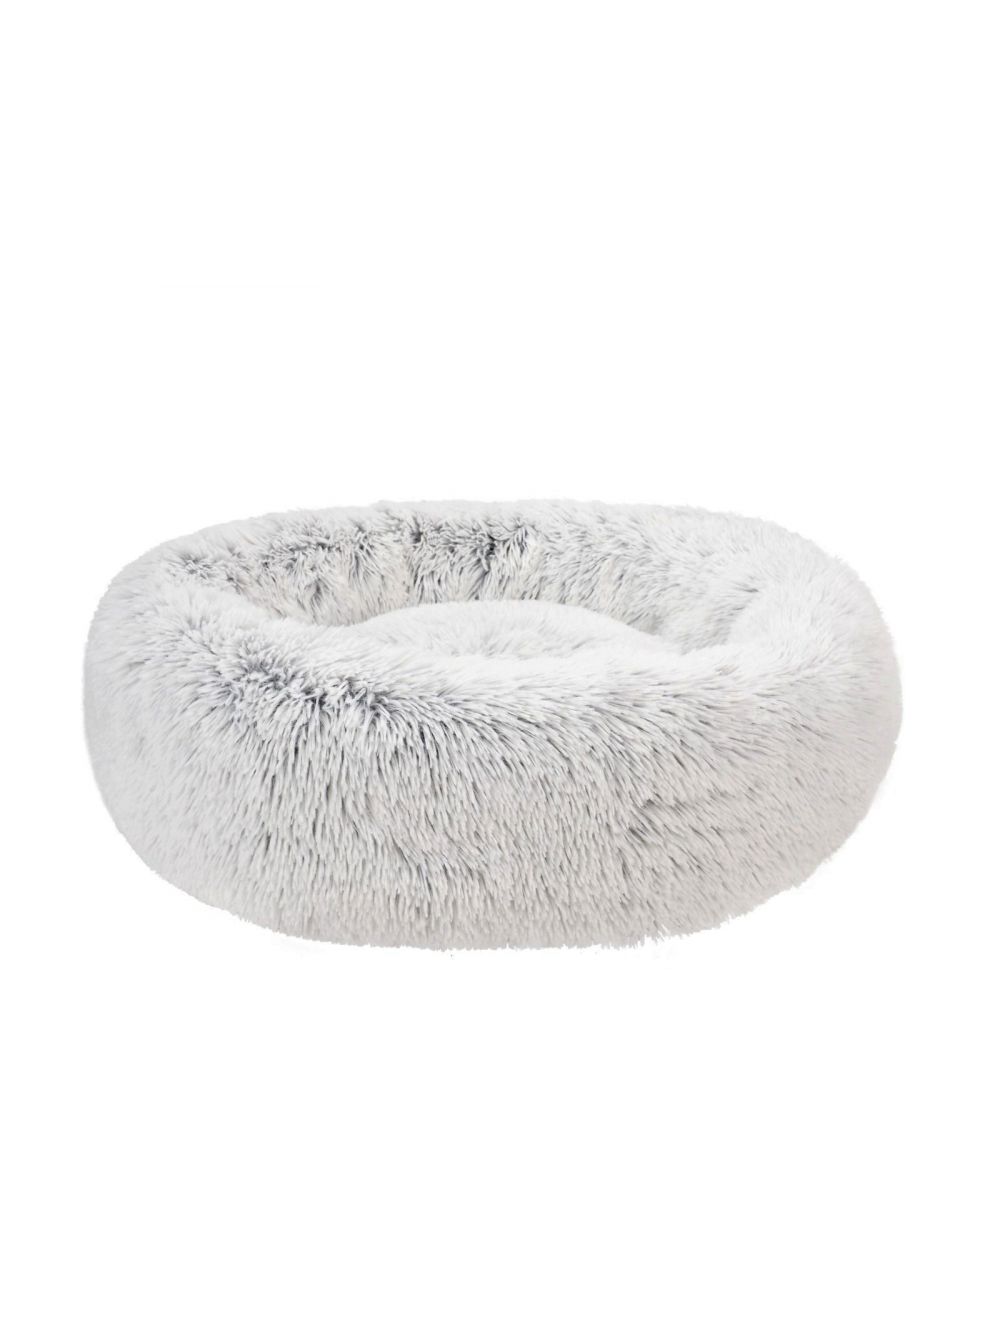 Fluffy - Dogbed M, Frozen white - (697271866301)